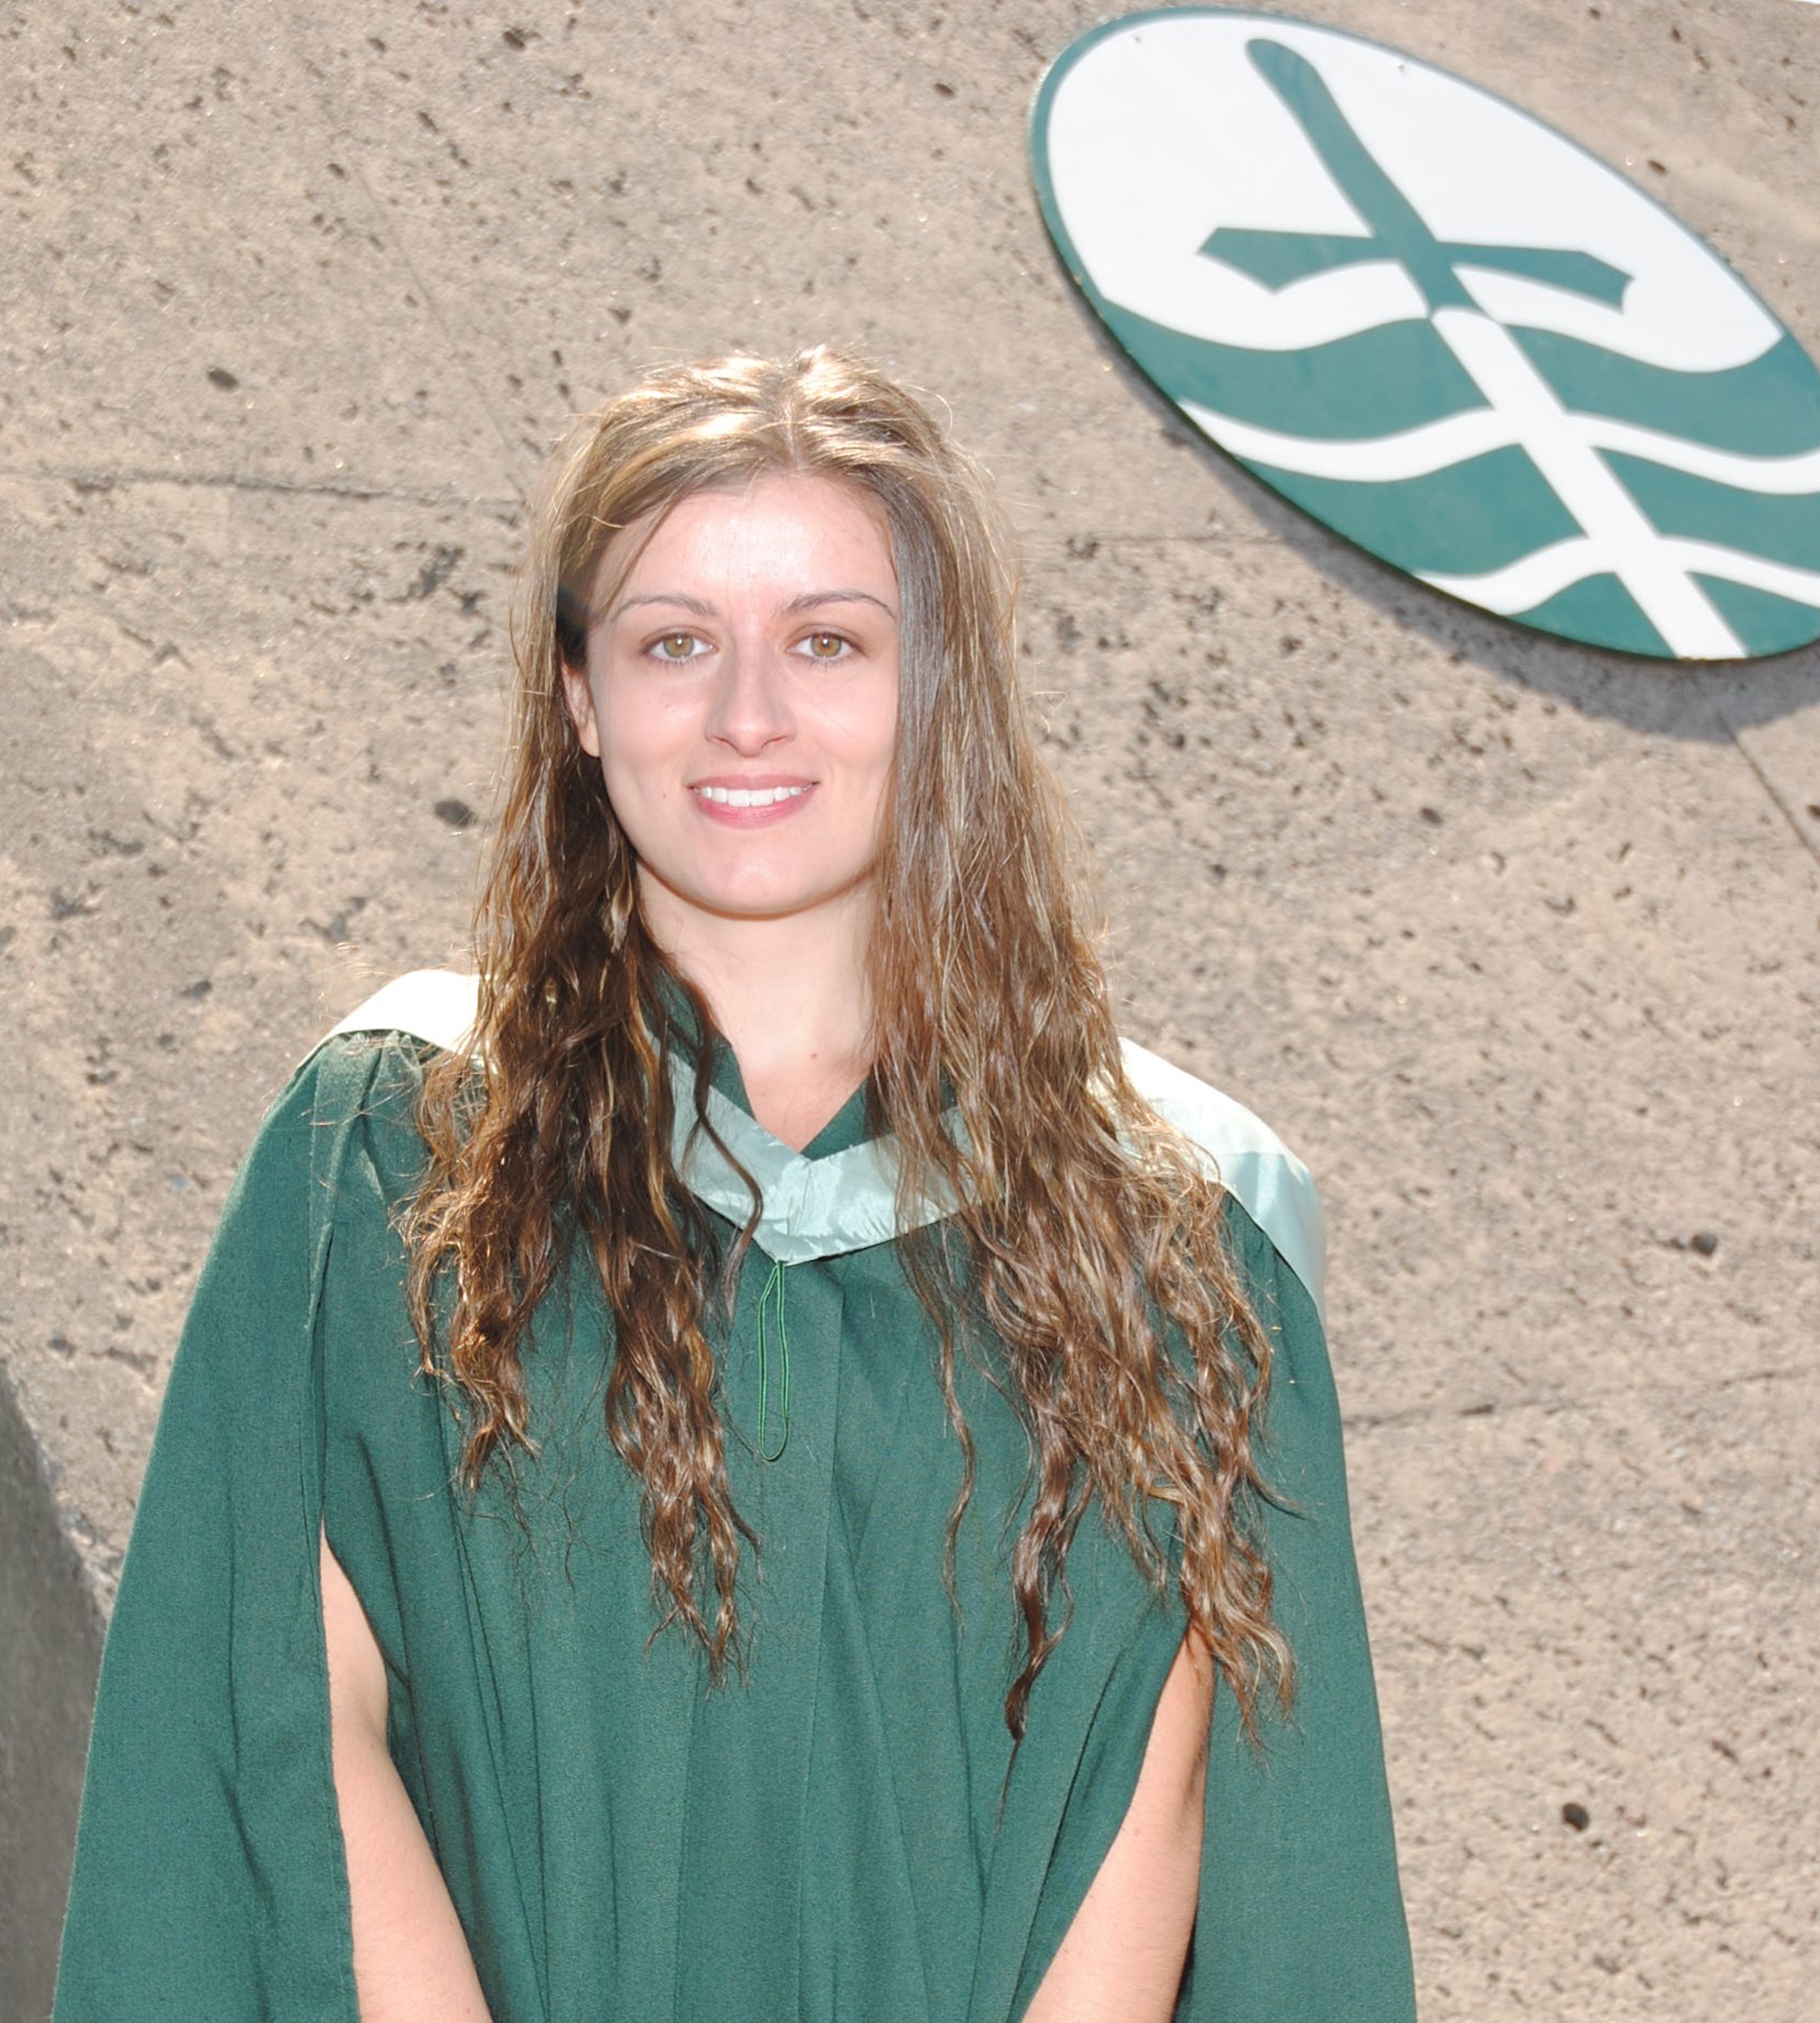 grad student Lindsay Thackeray wearing graduation gown smiling at camera with Trent emblem in background